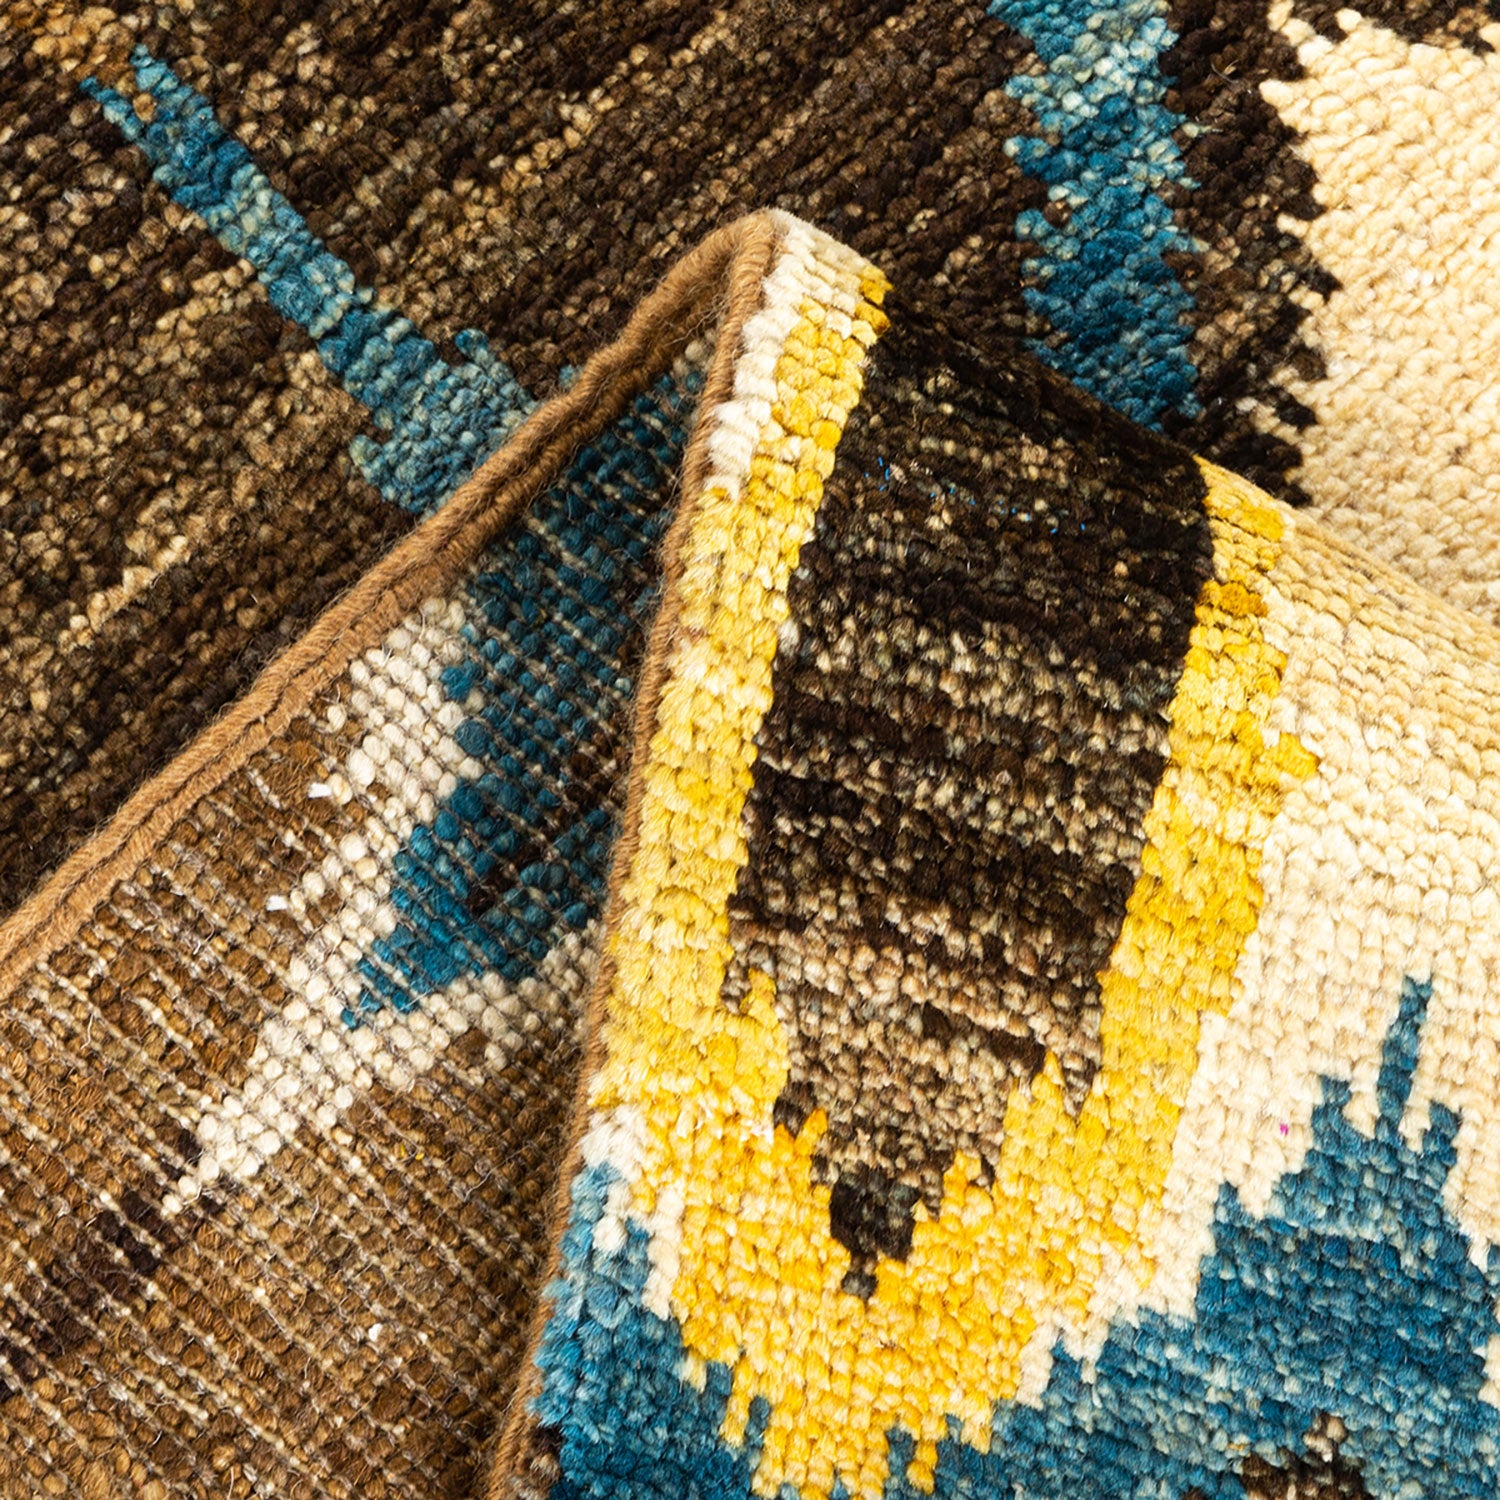 Close-up view of intricately woven textile with varied colors and texture.